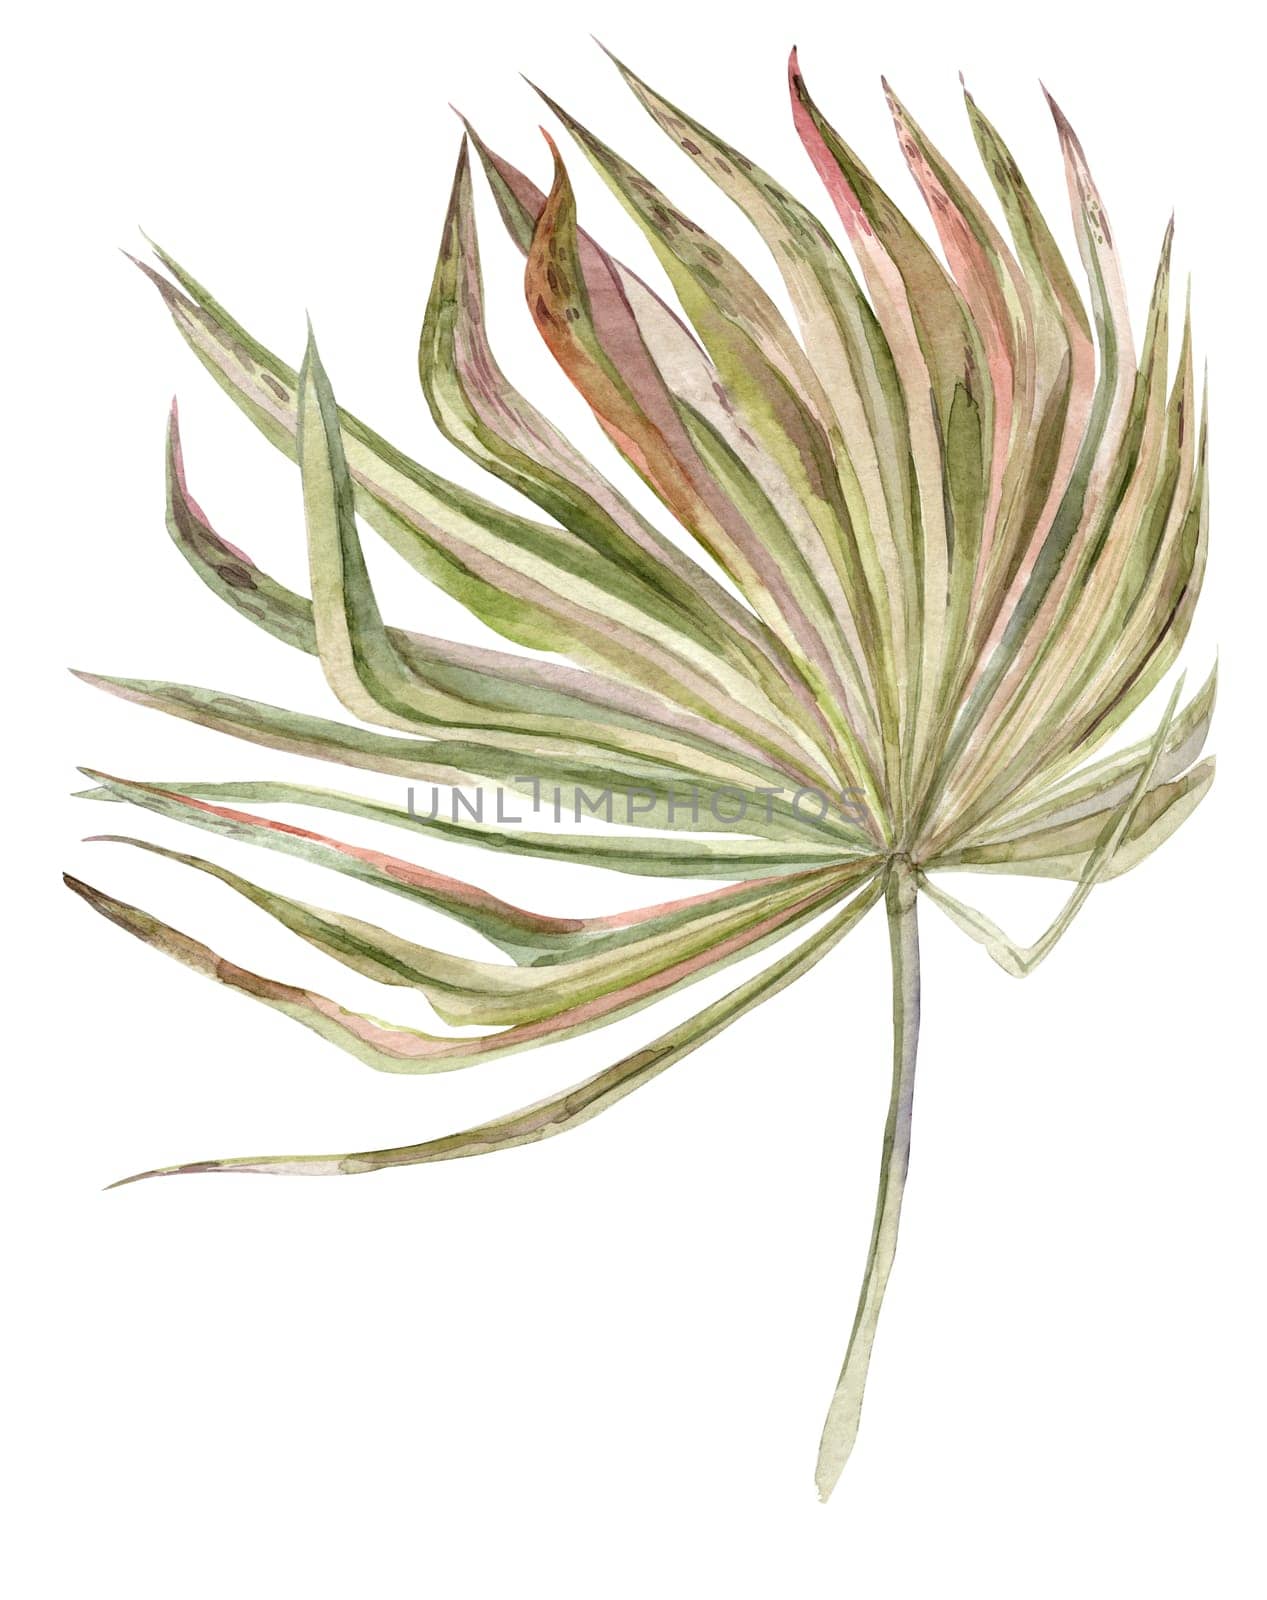 dry palm leaf illustration hand drawn in watercolor isolated on white background by MarinaVoyush